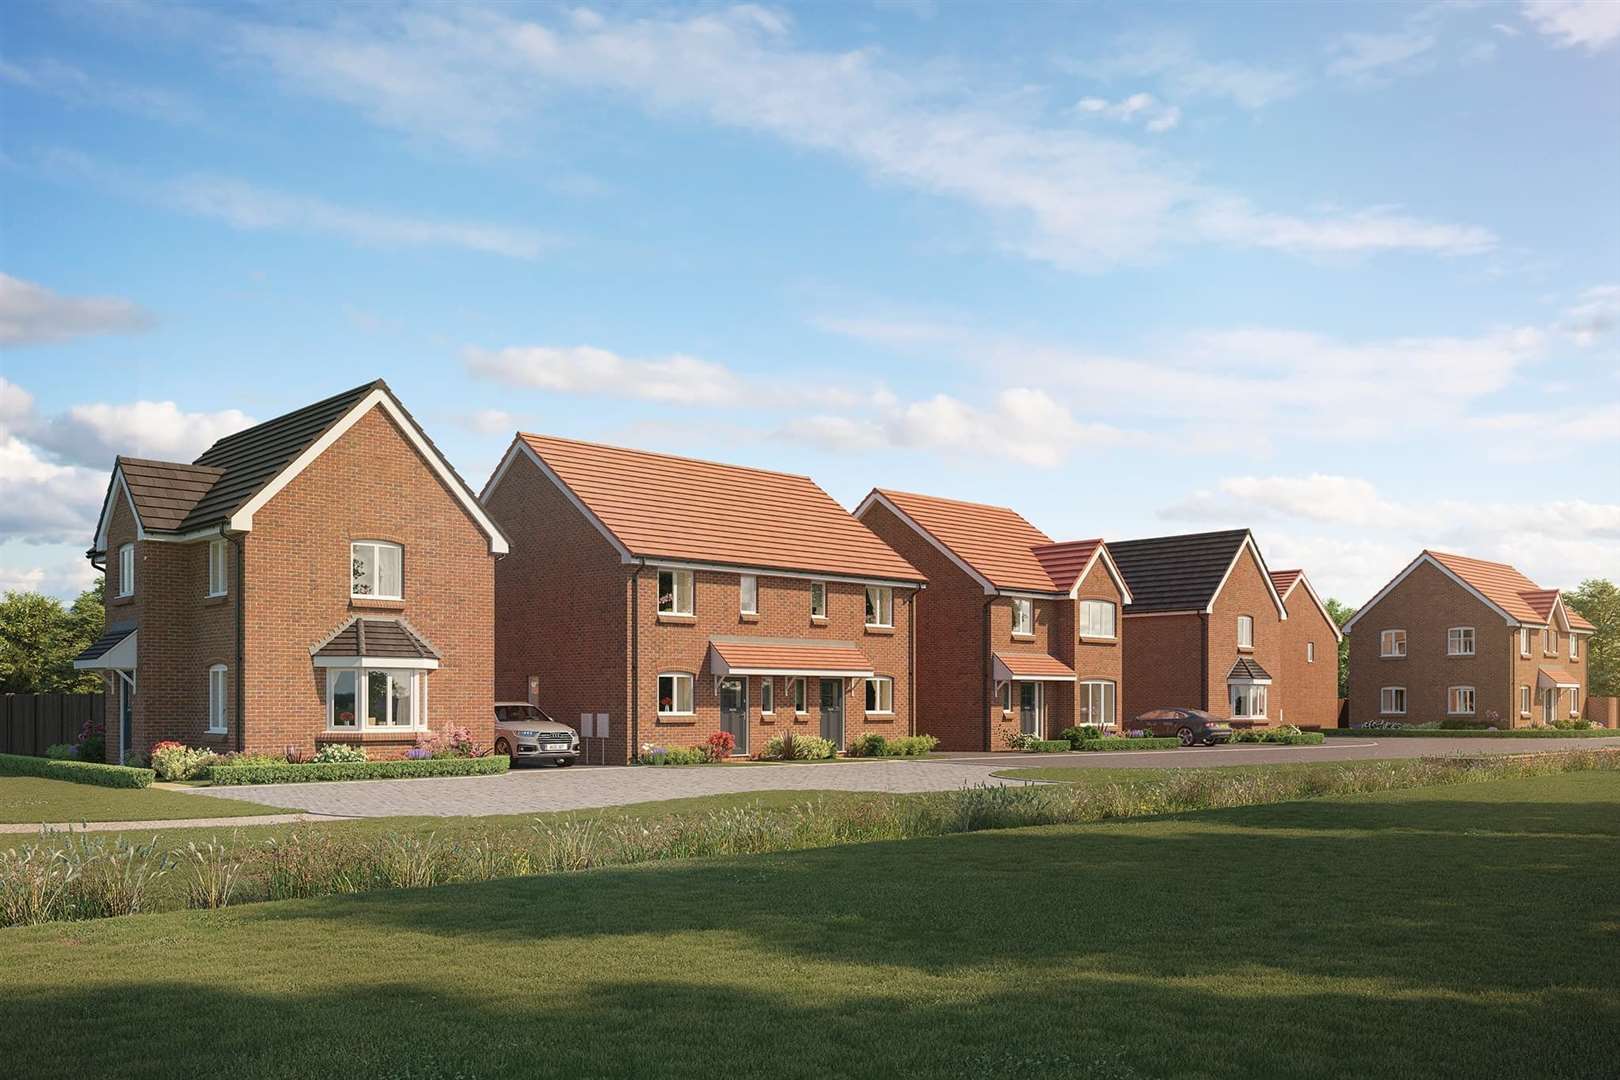 A computer-generated image of the homes being built at Kingfisher Green in Rainham